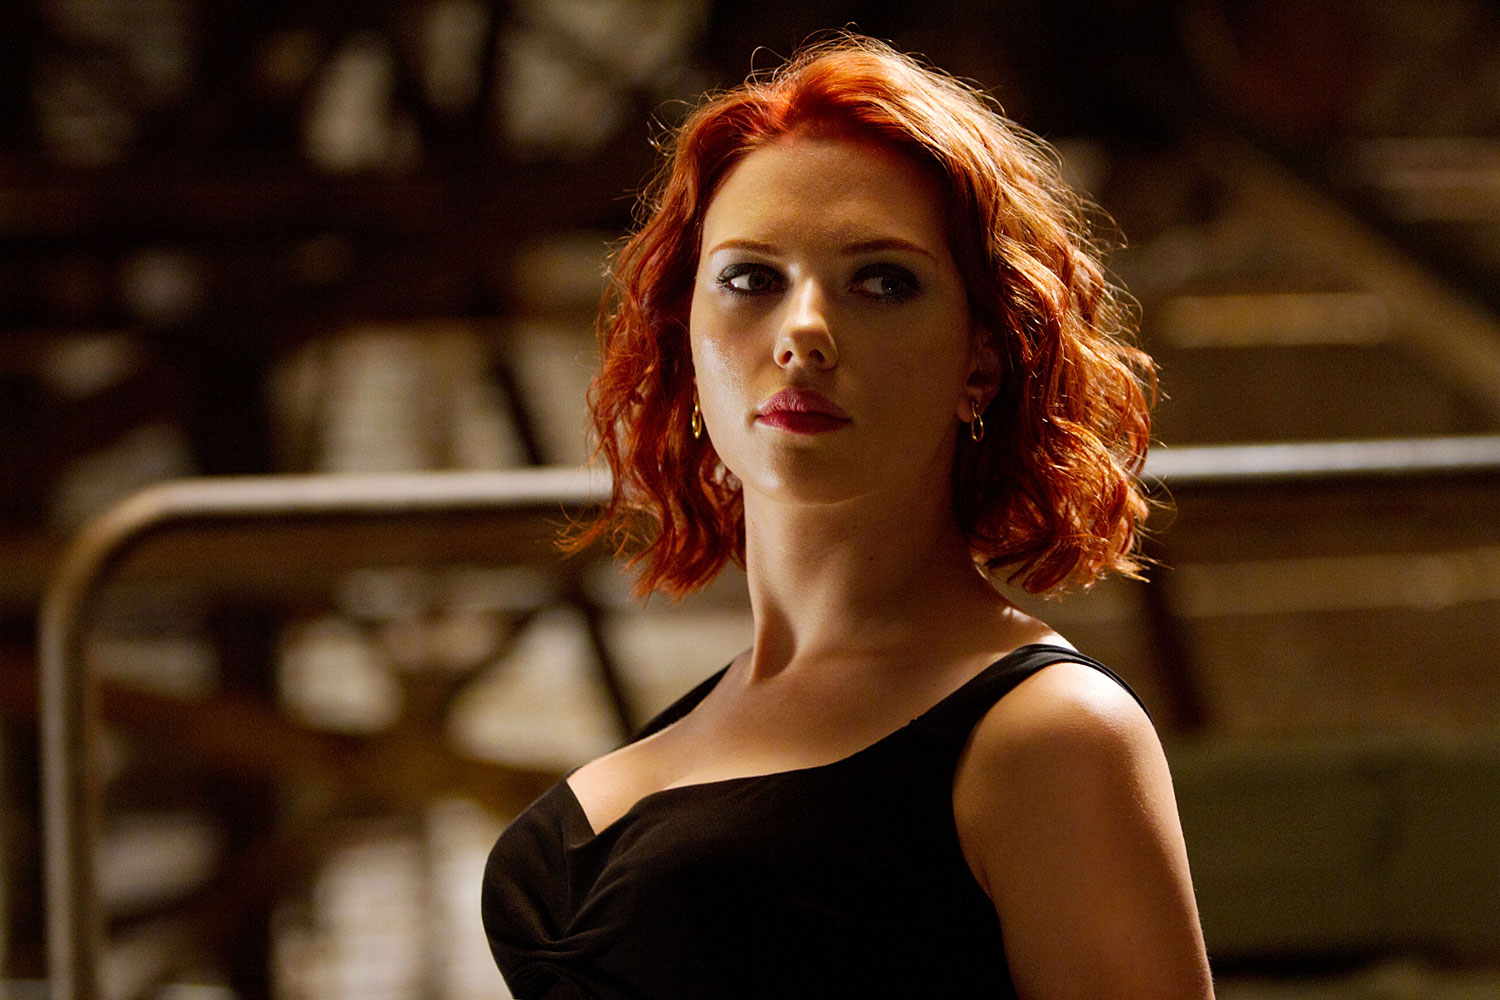 Natasha Romanoff a.k.a. Black Widow (Played by Scarlett Johansson) - A grade-A assassin who was initially brainwashed by the KGB, she’s fighting with the Avengers now. Nat is an indispensable member of the team who can ride a motorcycle and ruthlessly kick ass with the best of them.